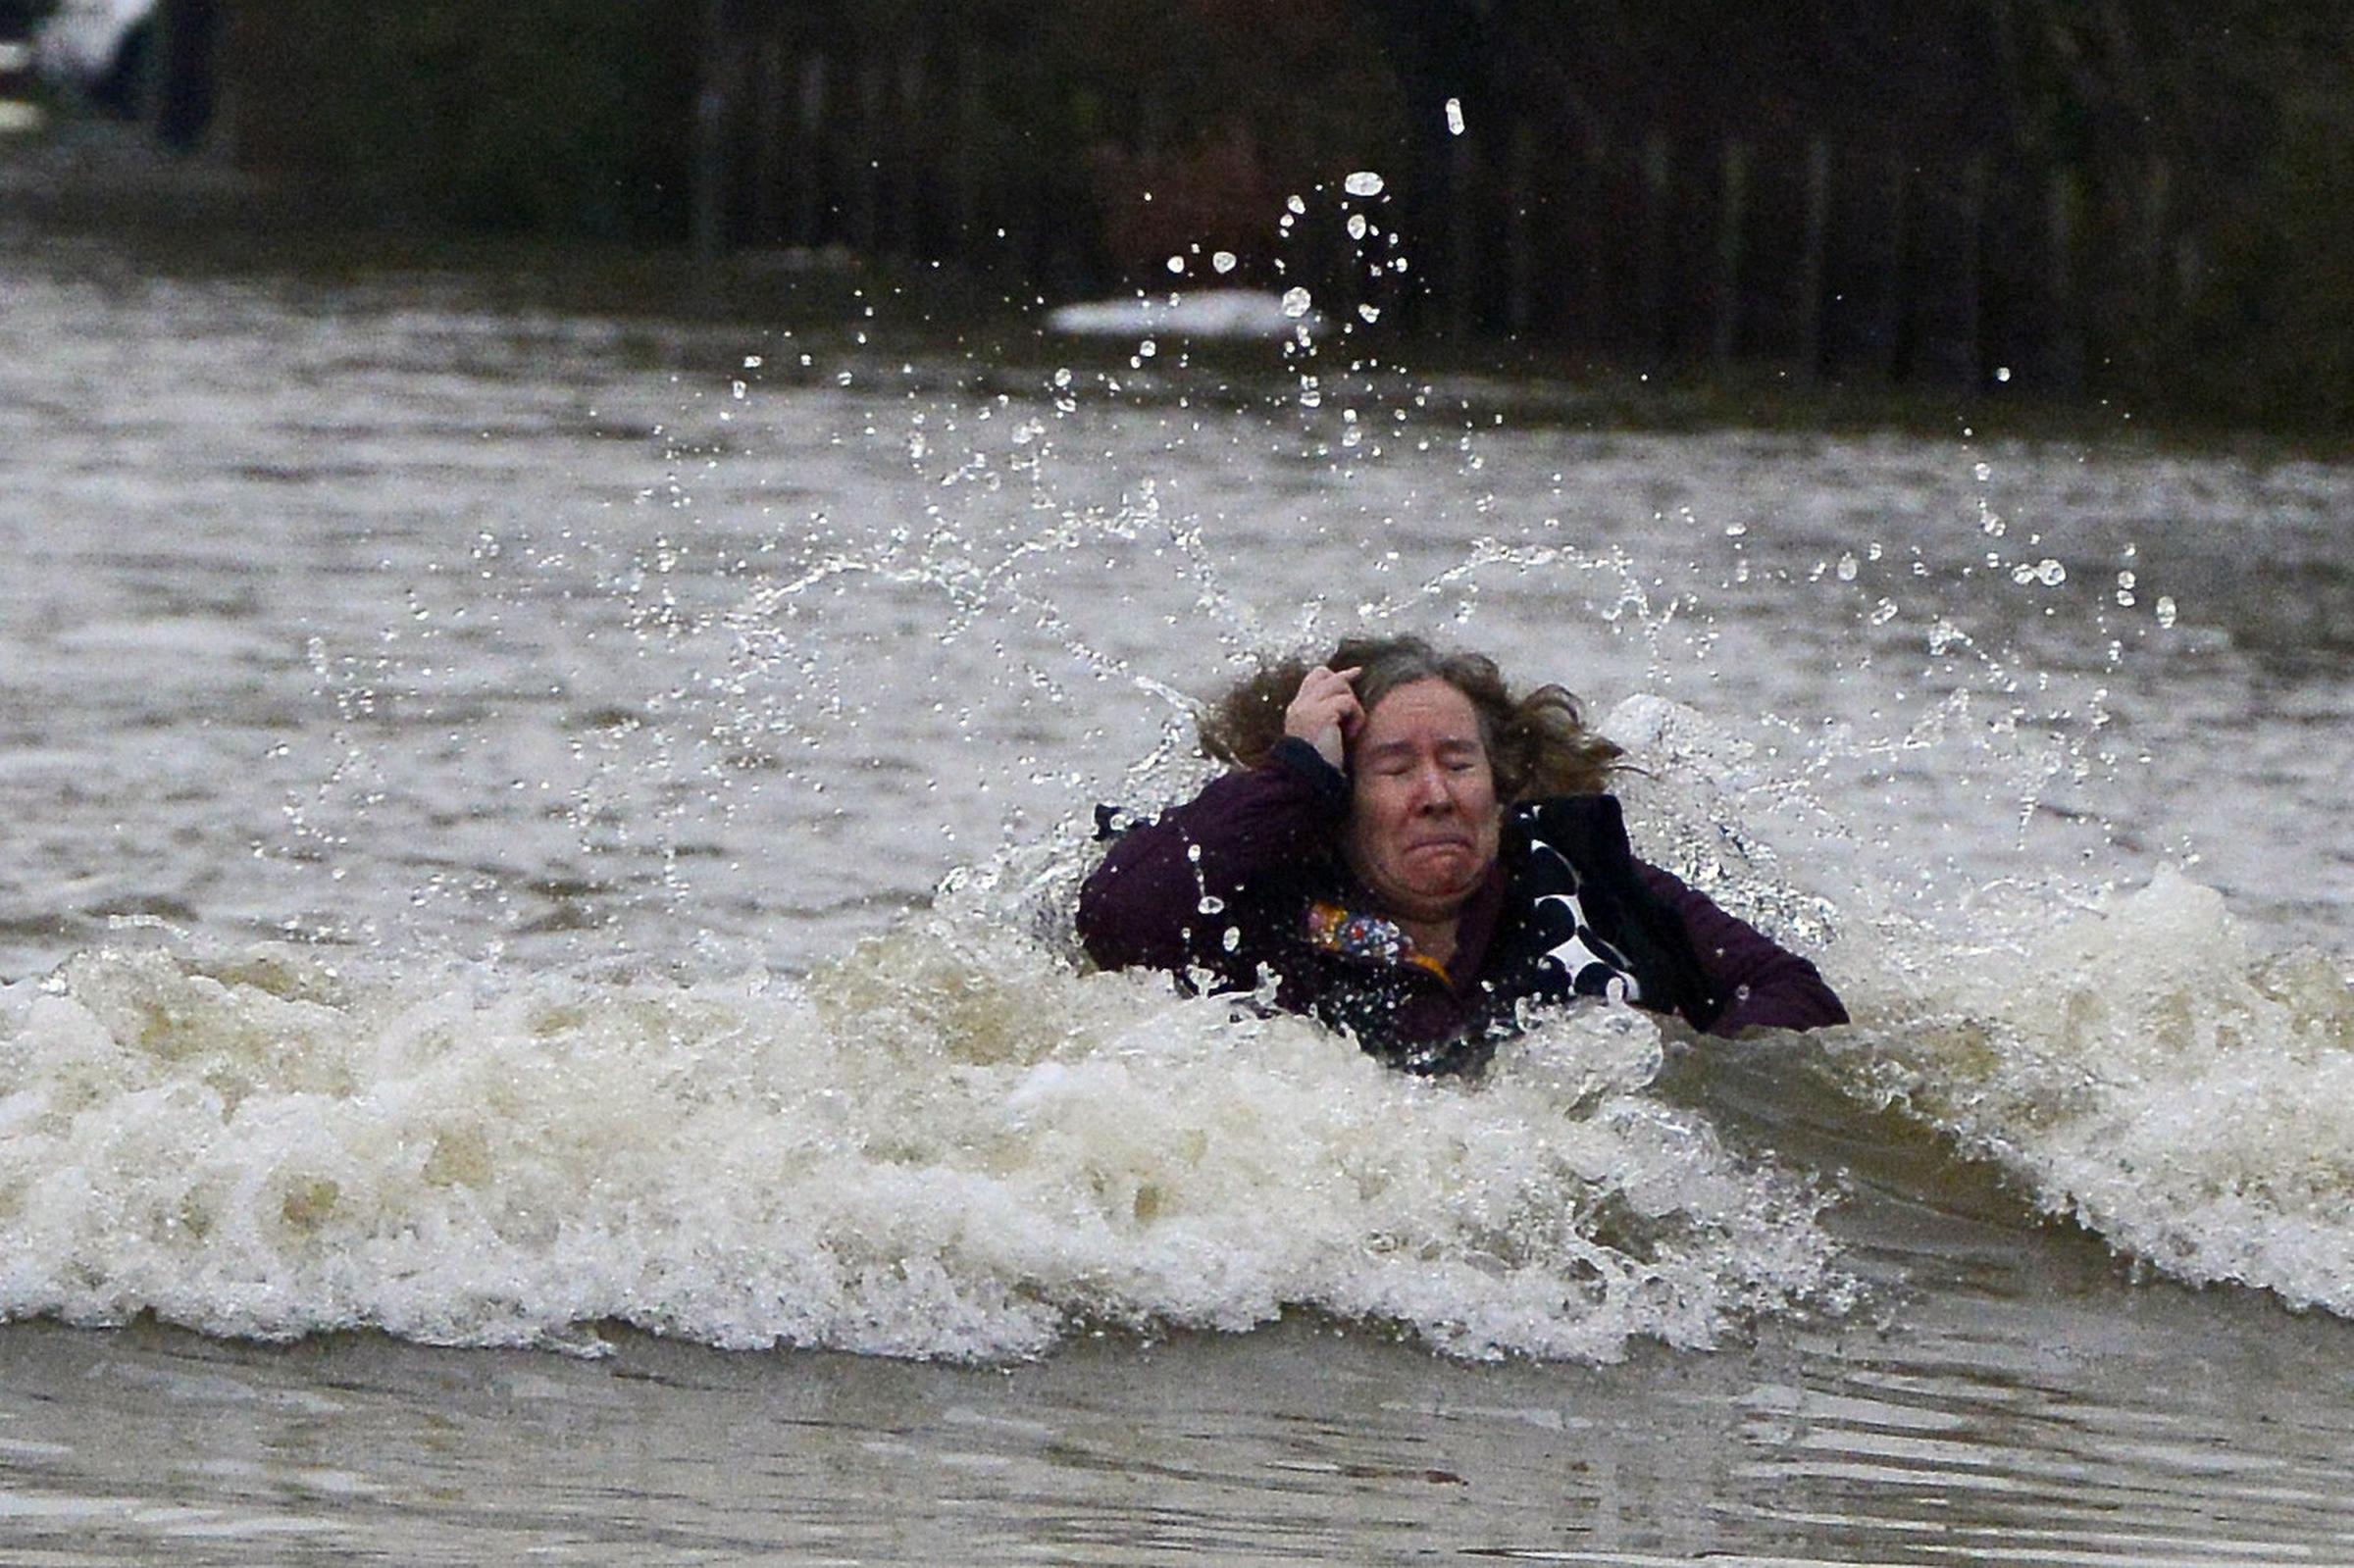 A woman becomes caught up in a lorries wash during flooding, Feb. 10, 2014, in Old Windsor in Berkshire after the River Thames burst its banks.